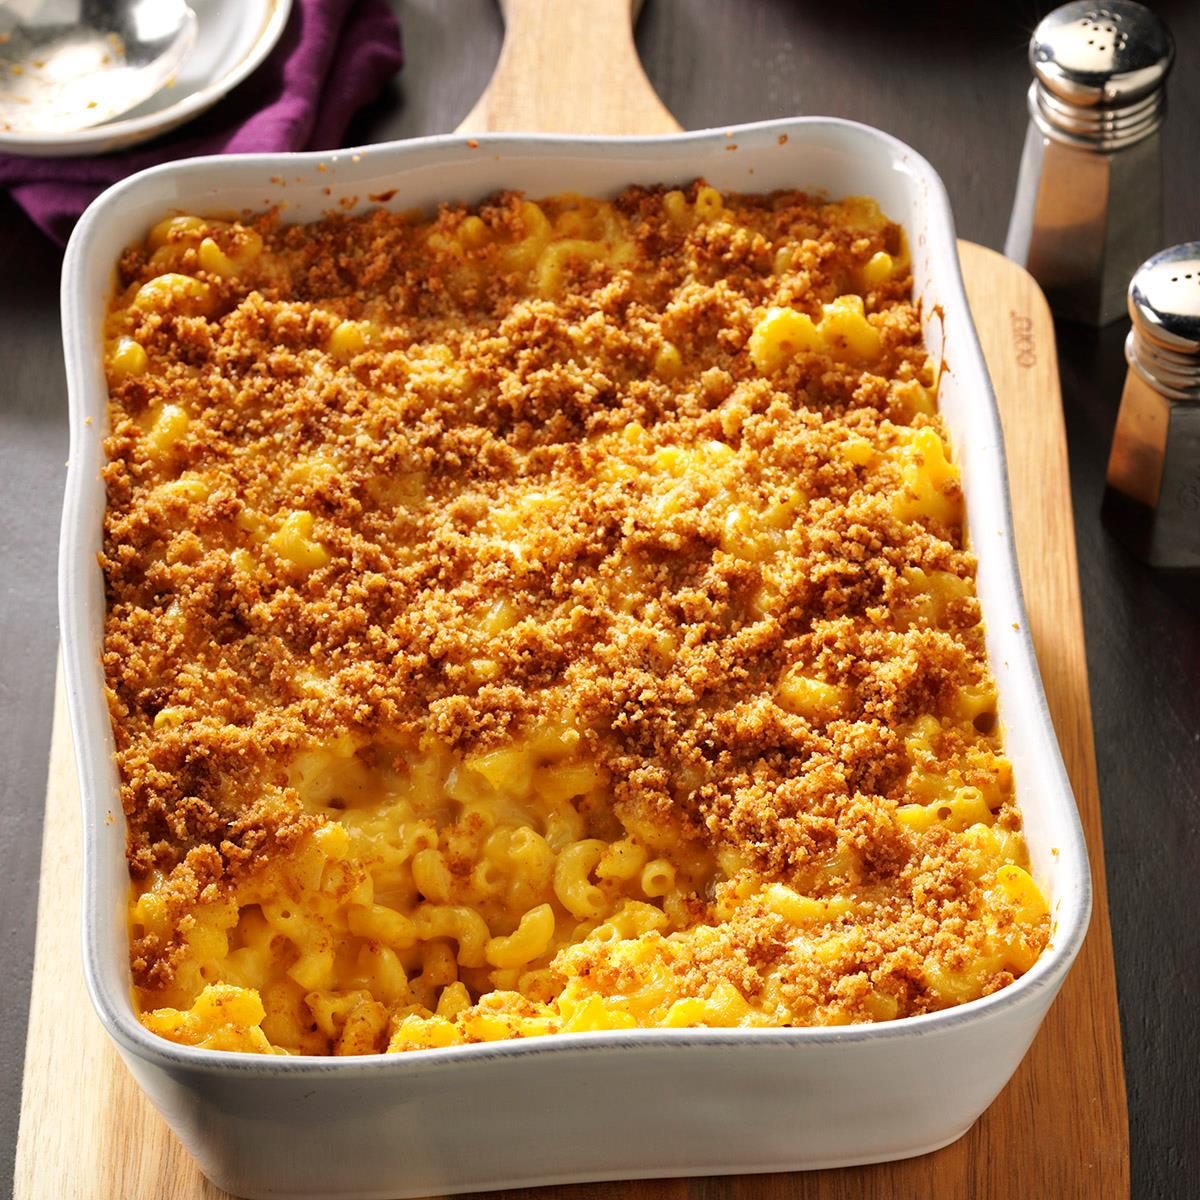 Inspired by: Country Kitchen’s Classic Mac & Cheese